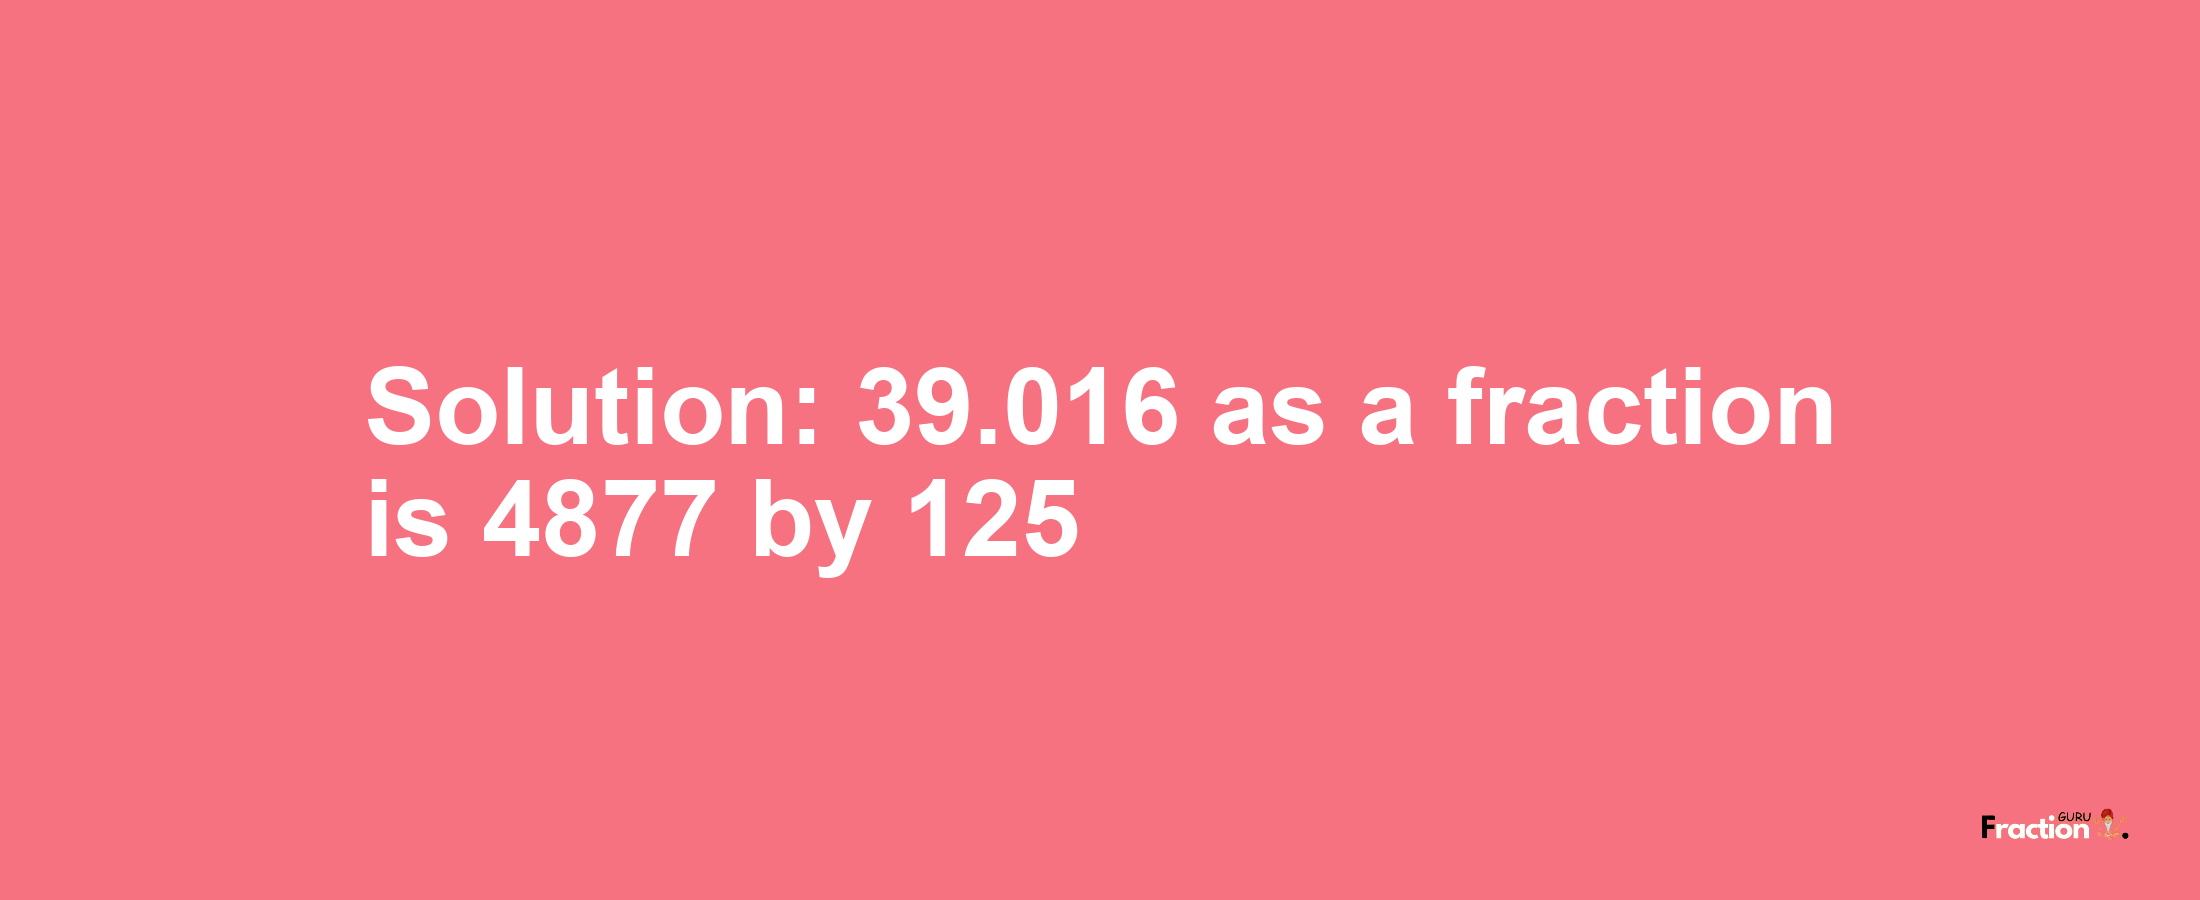 Solution:39.016 as a fraction is 4877/125